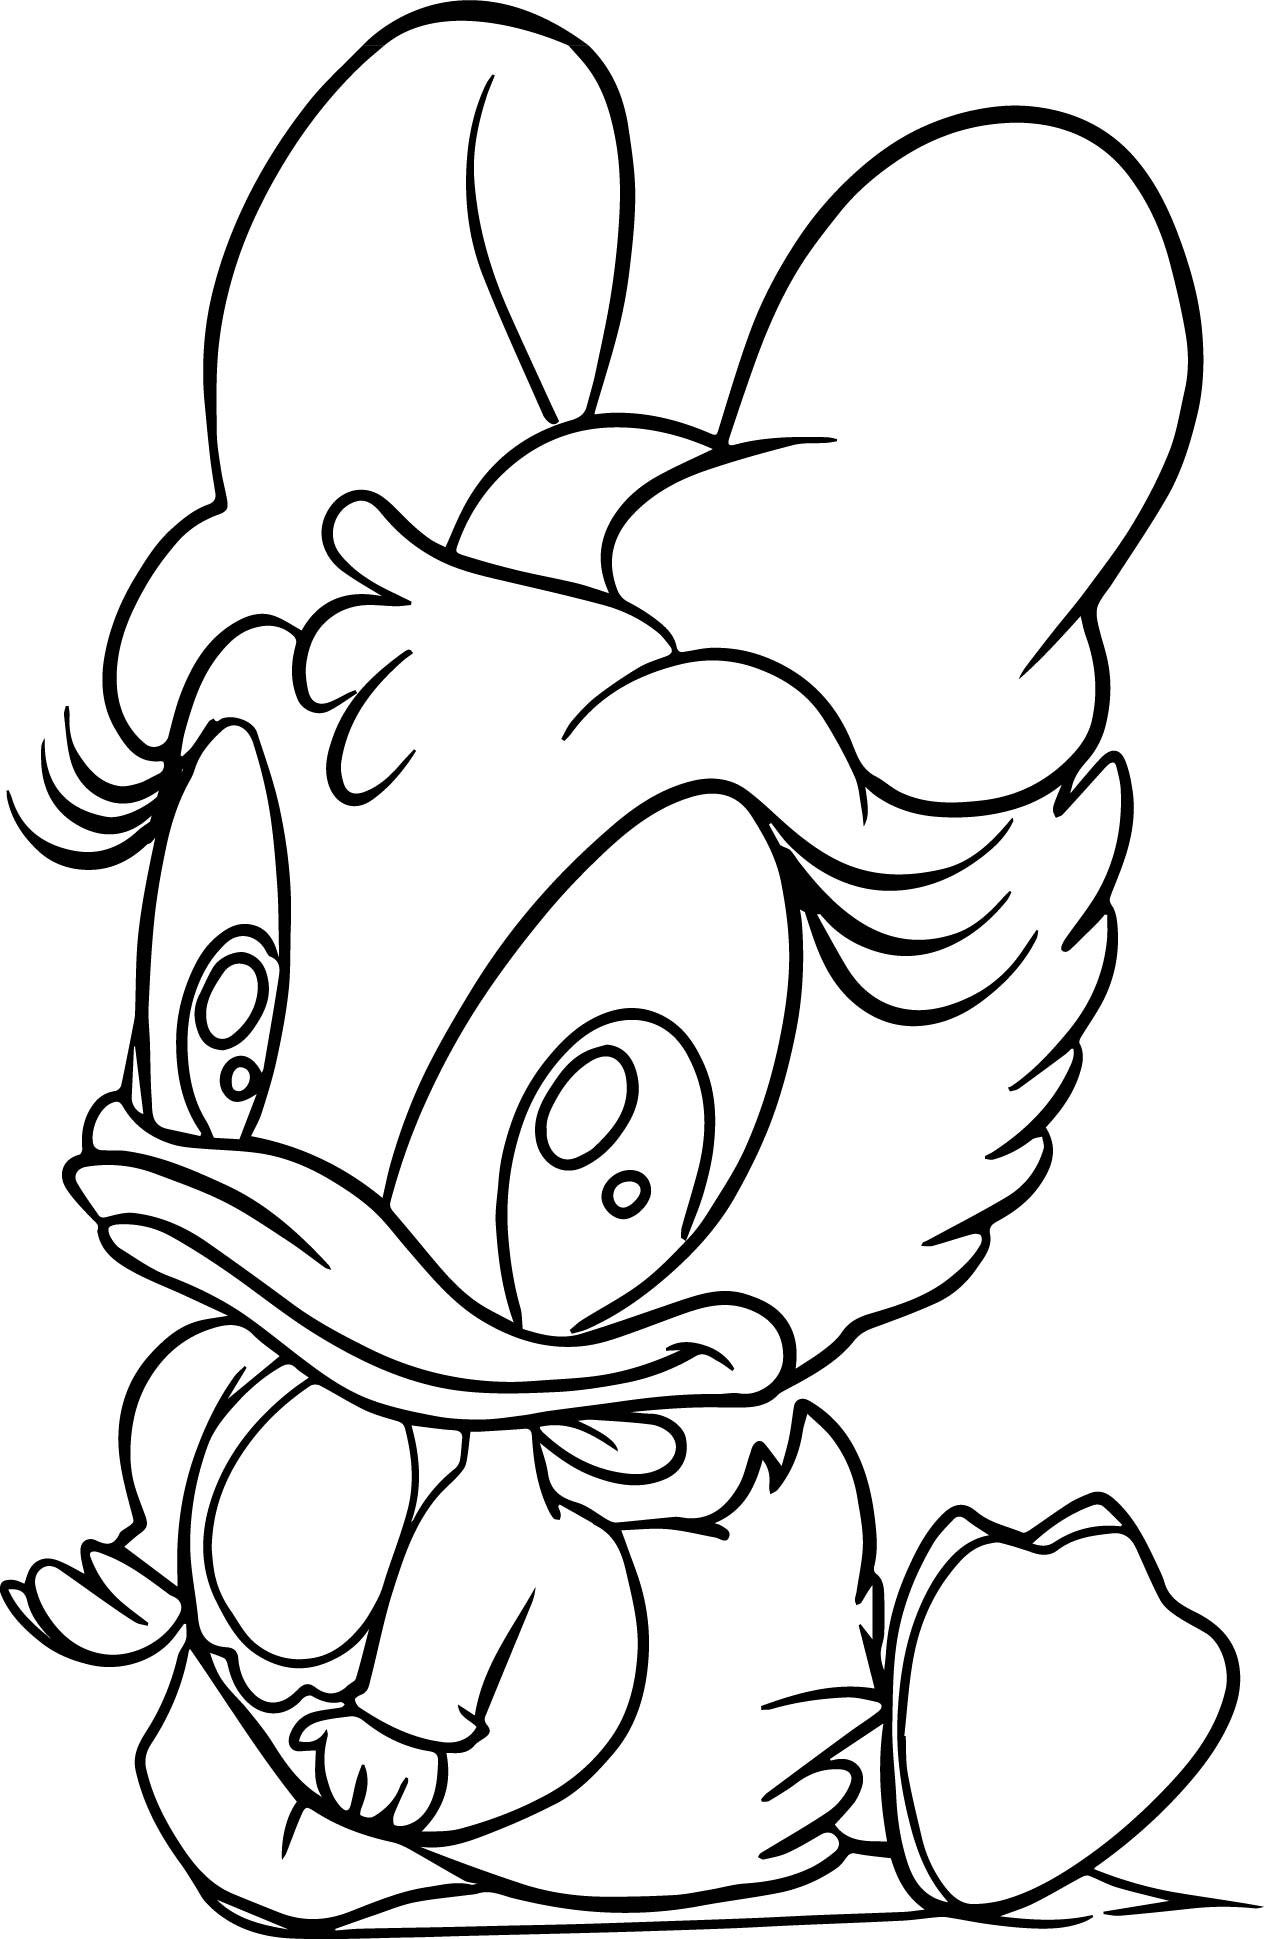 Baby Daisy Duck Coloring Pages
 Cute Baby Daisy Duck Coloring Page